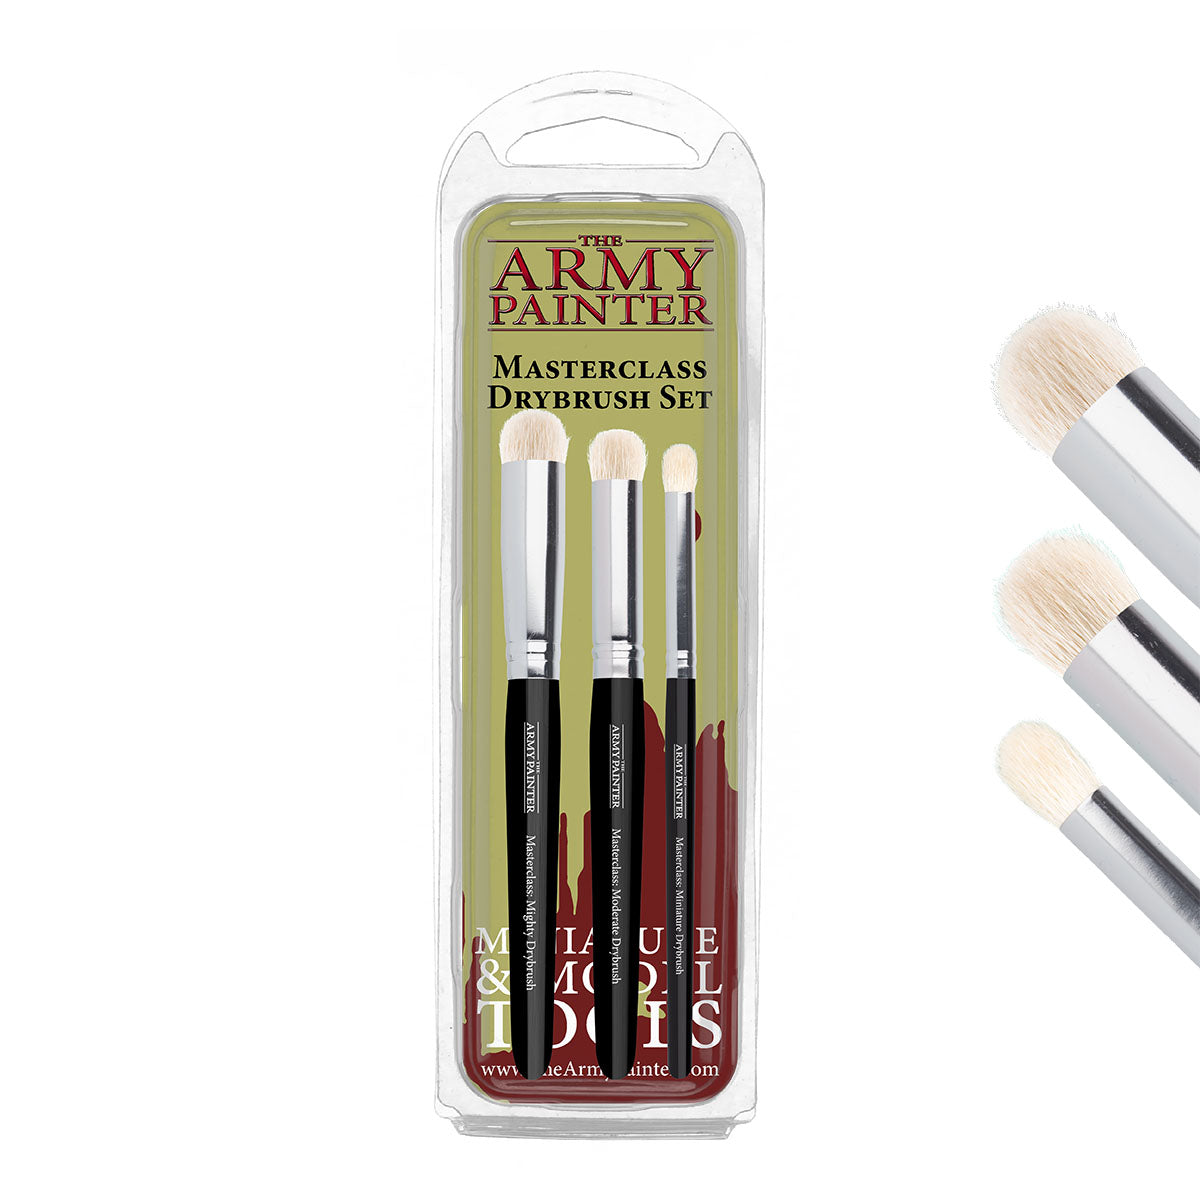 Find quality brushes for hobby painting here- The Army Painter